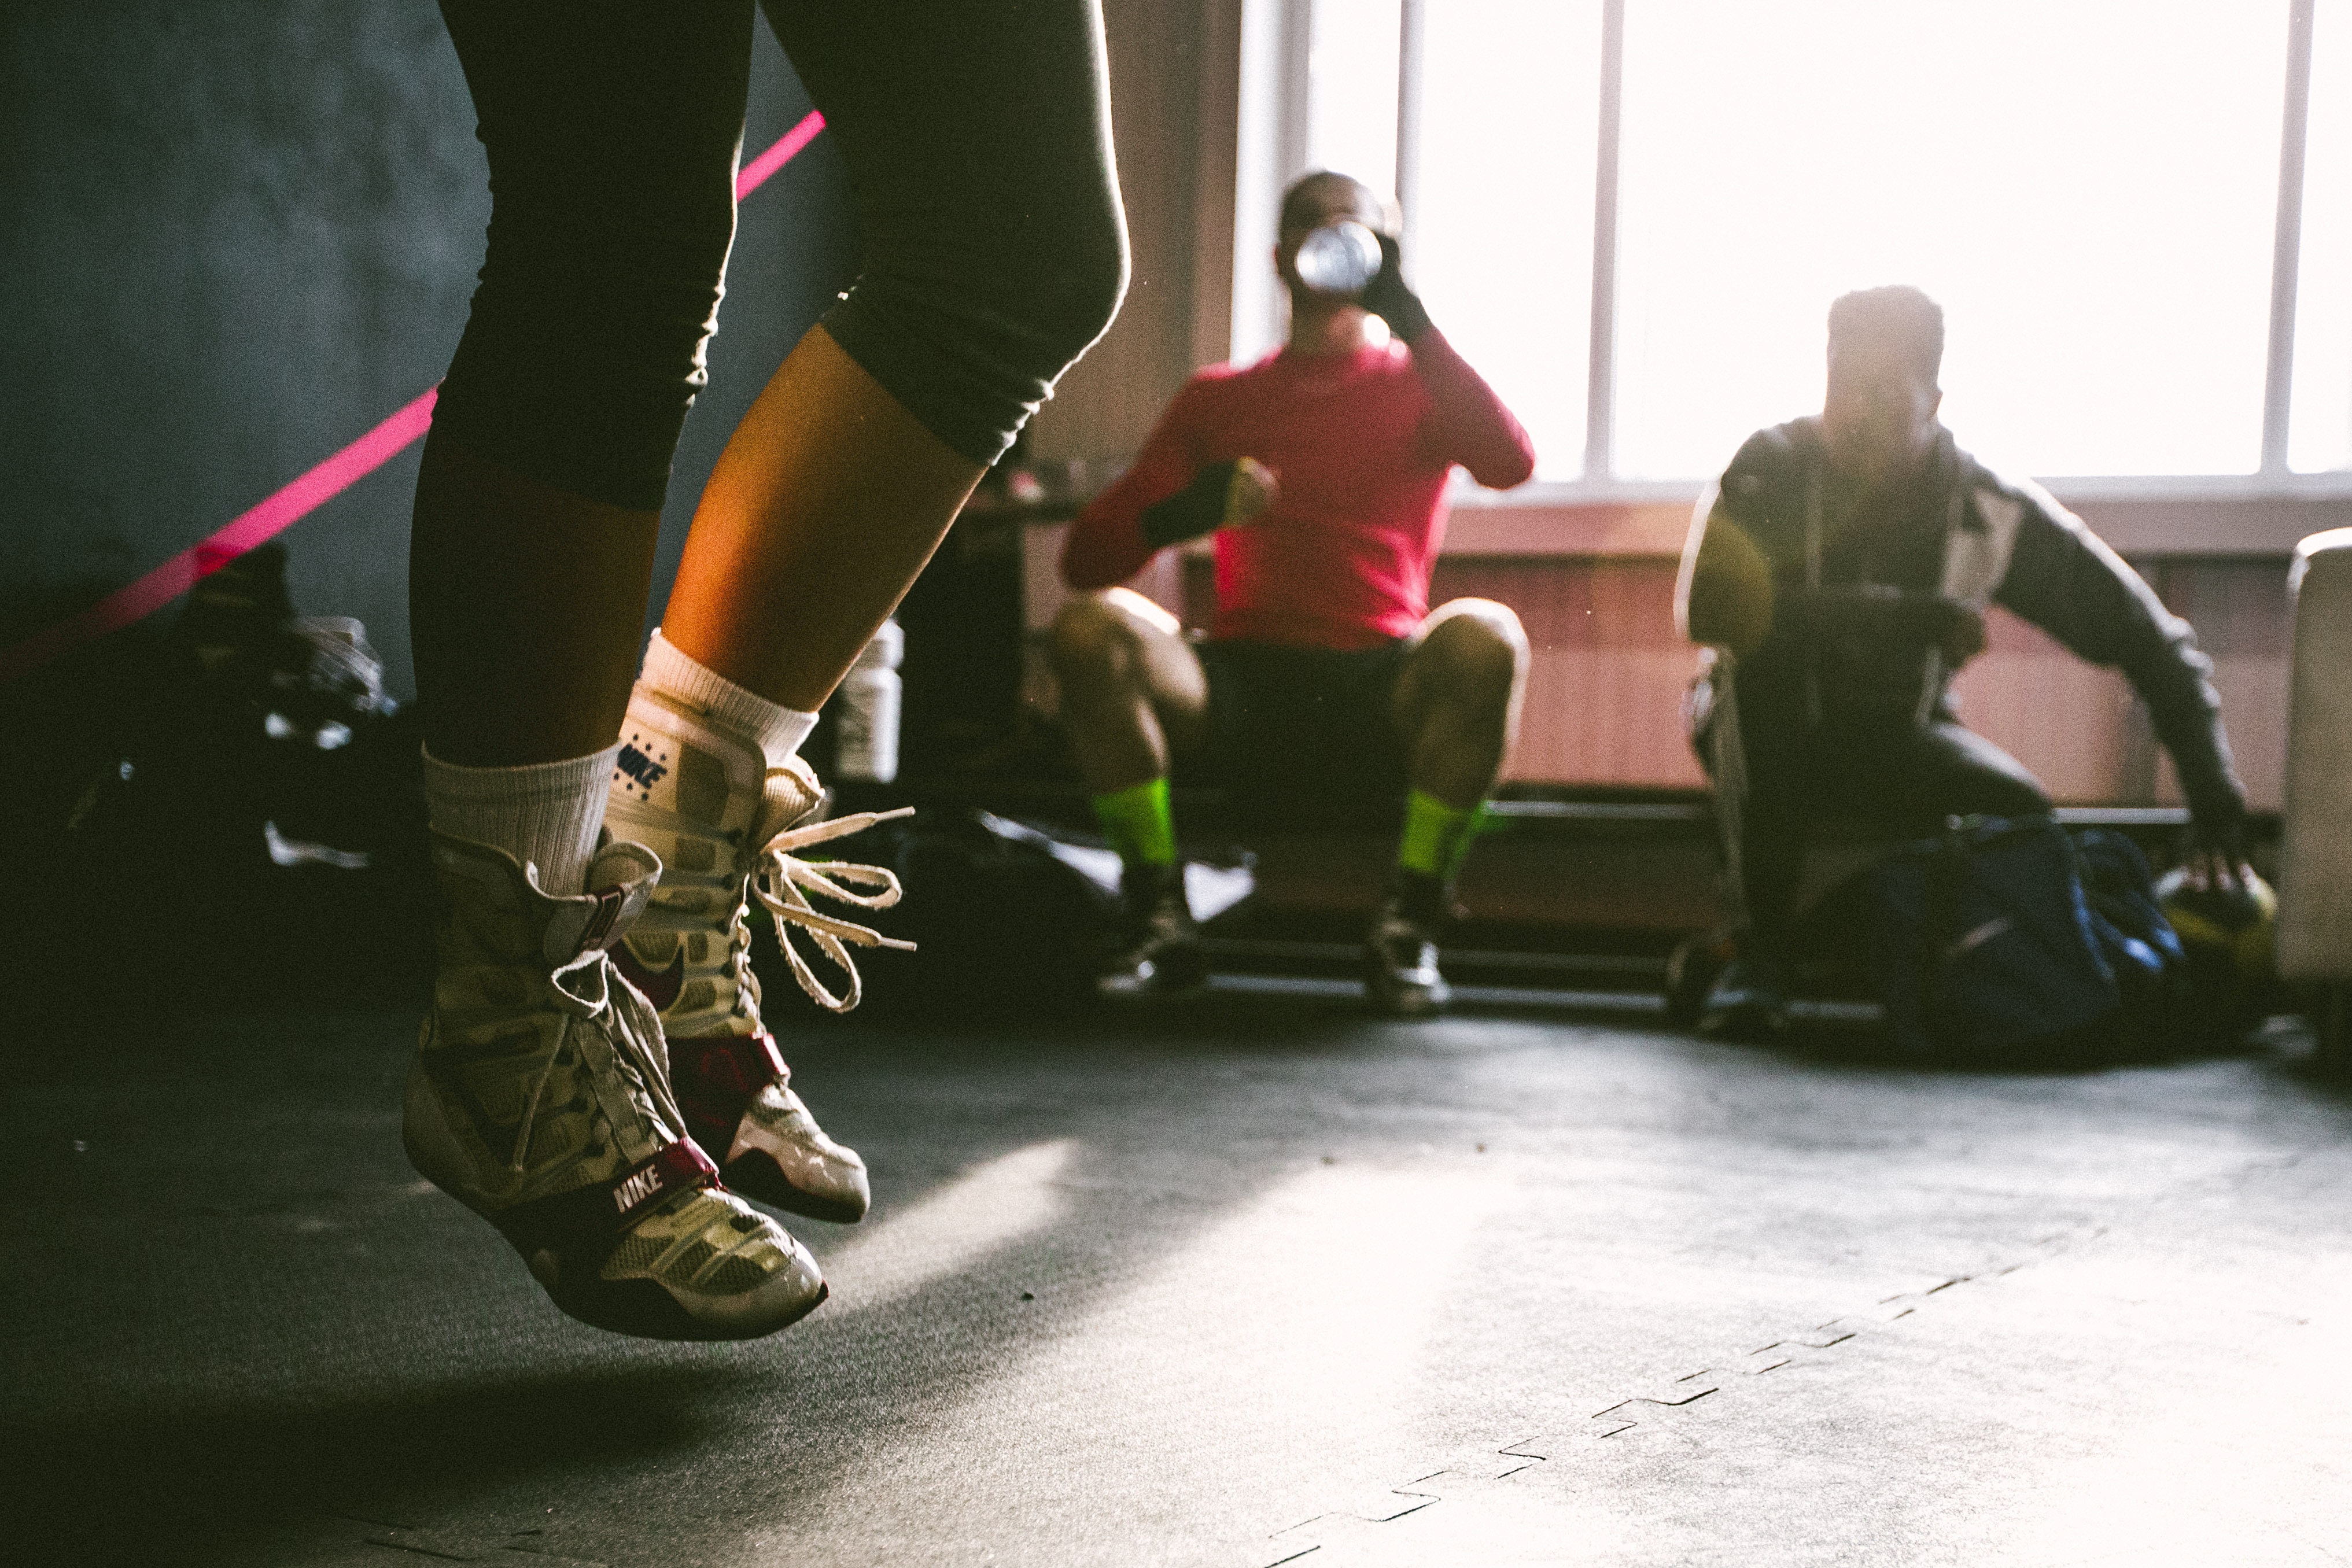 Are you a certified personal trainer looking to expand? Consider opening your own personal training business. Learn how in this blog.